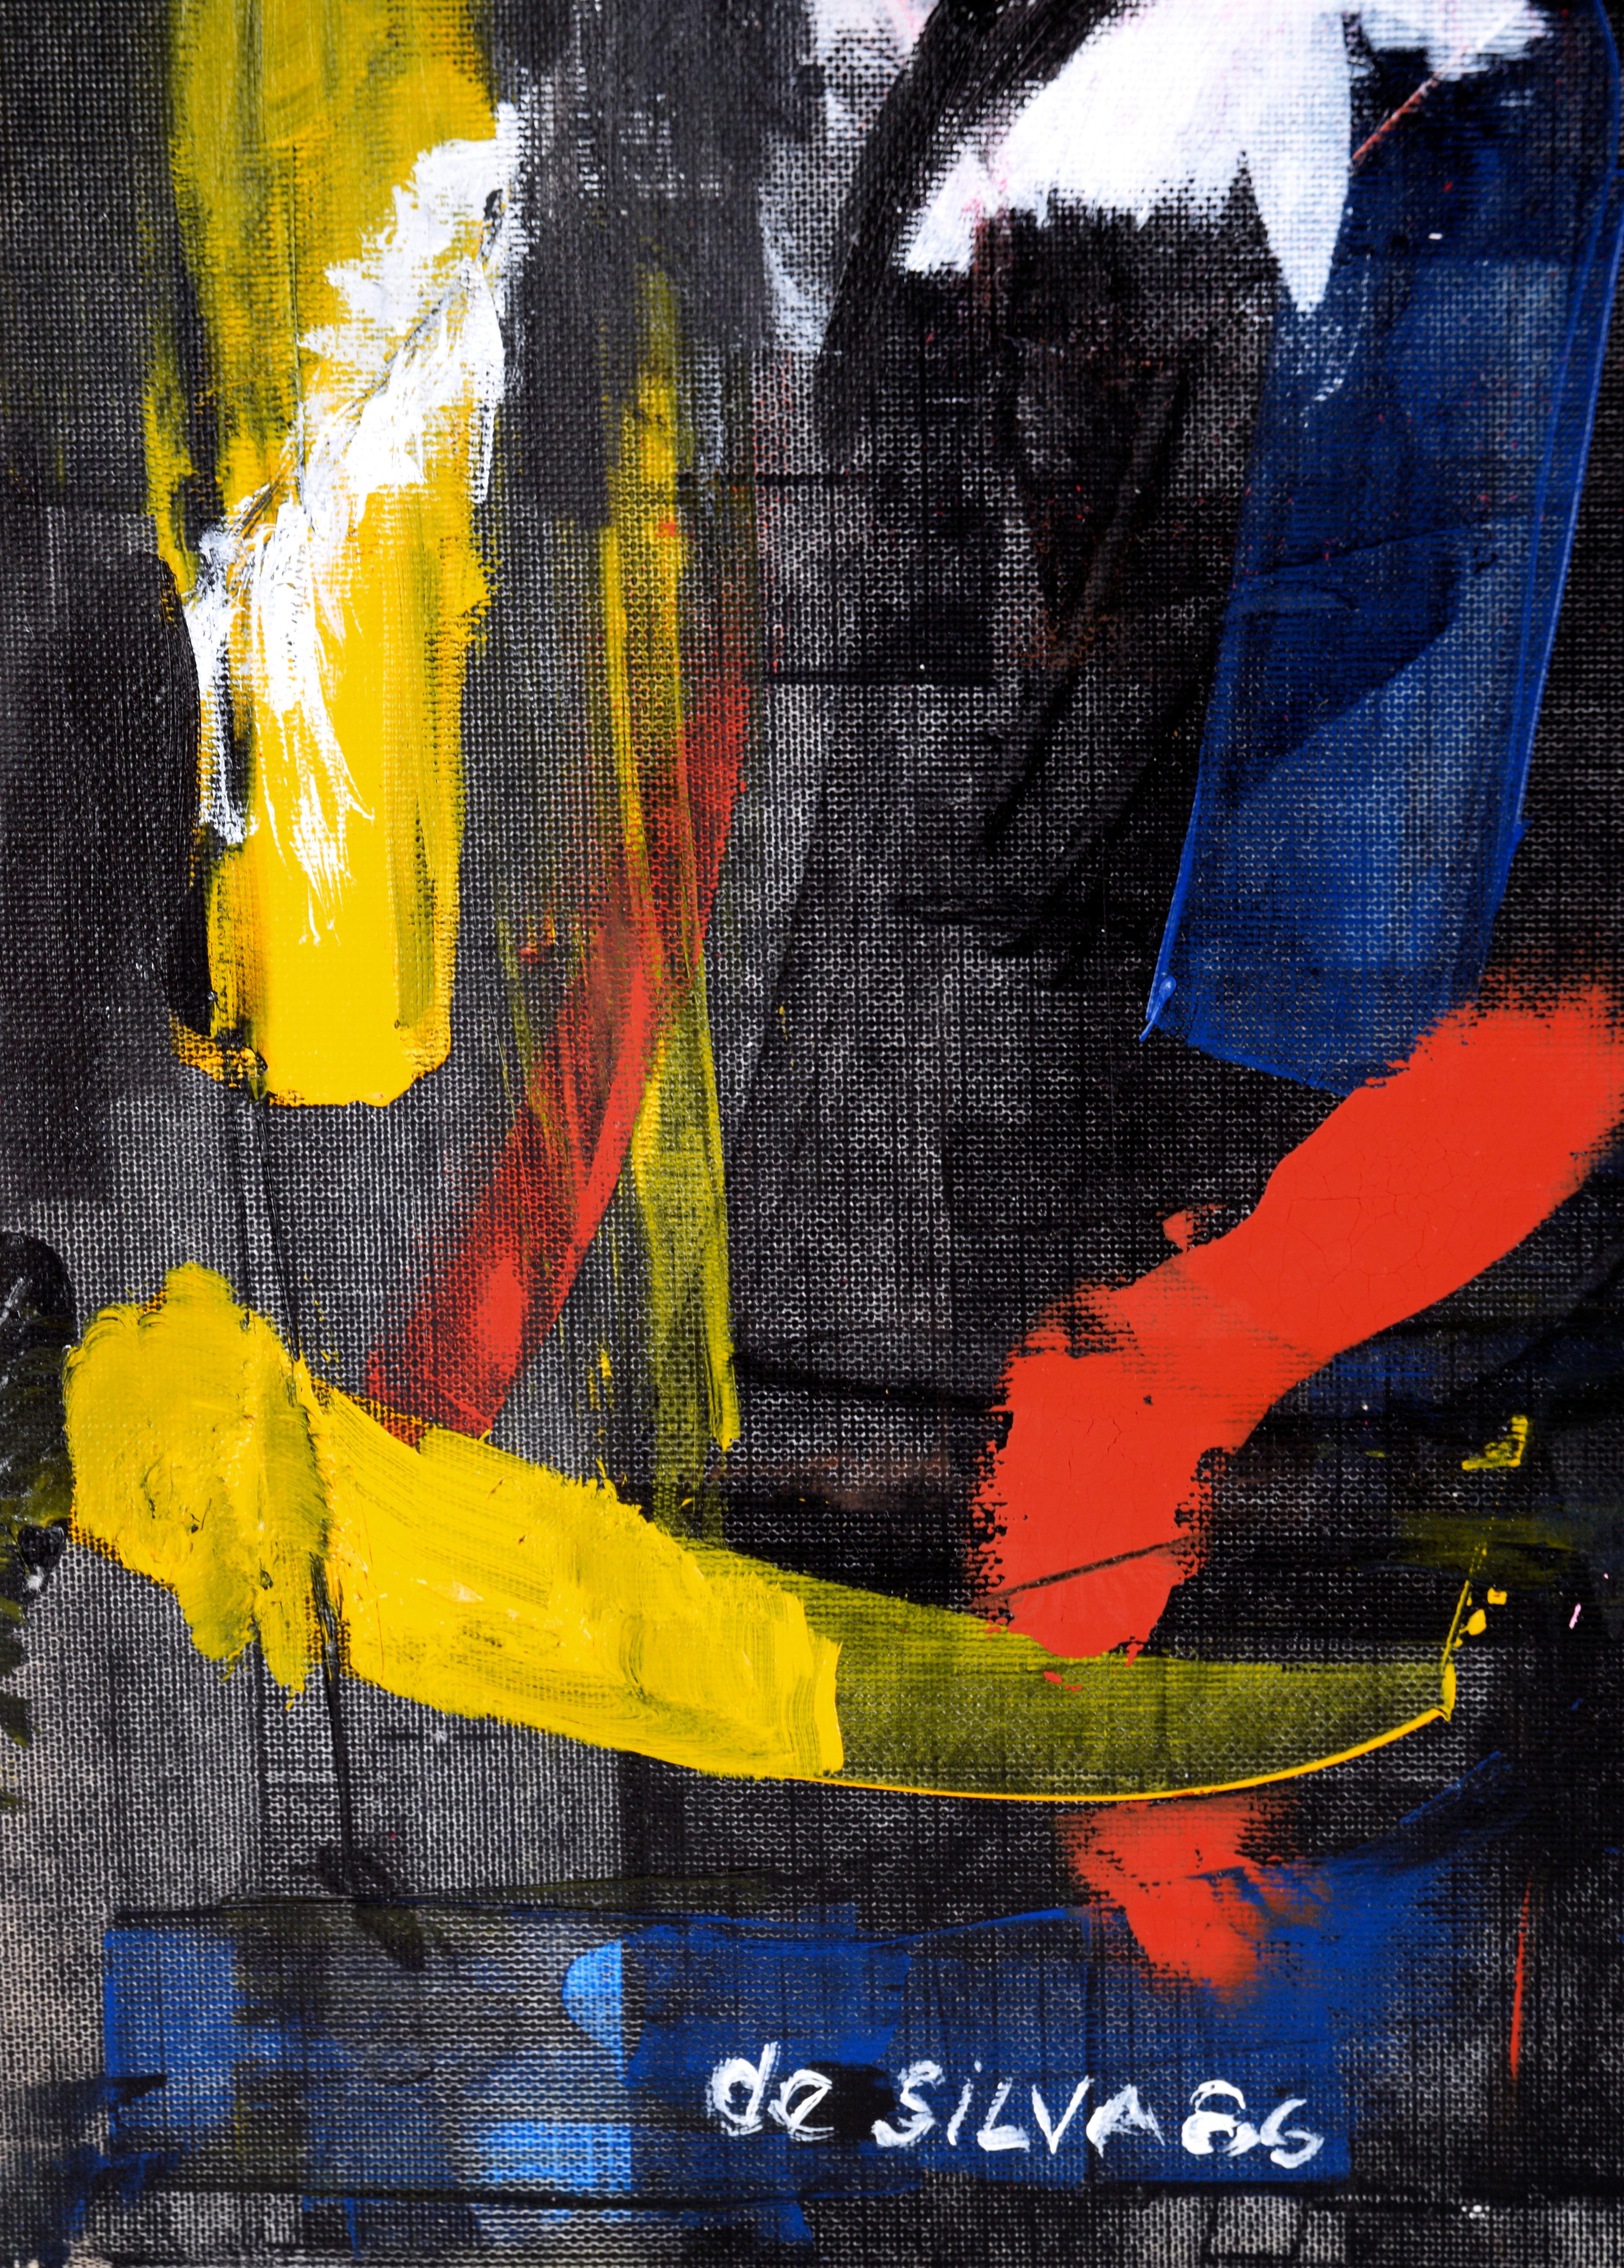 Primary Colors in Acrylic on Textured Paper Abstract Expressionist San Francisco For Sale 1